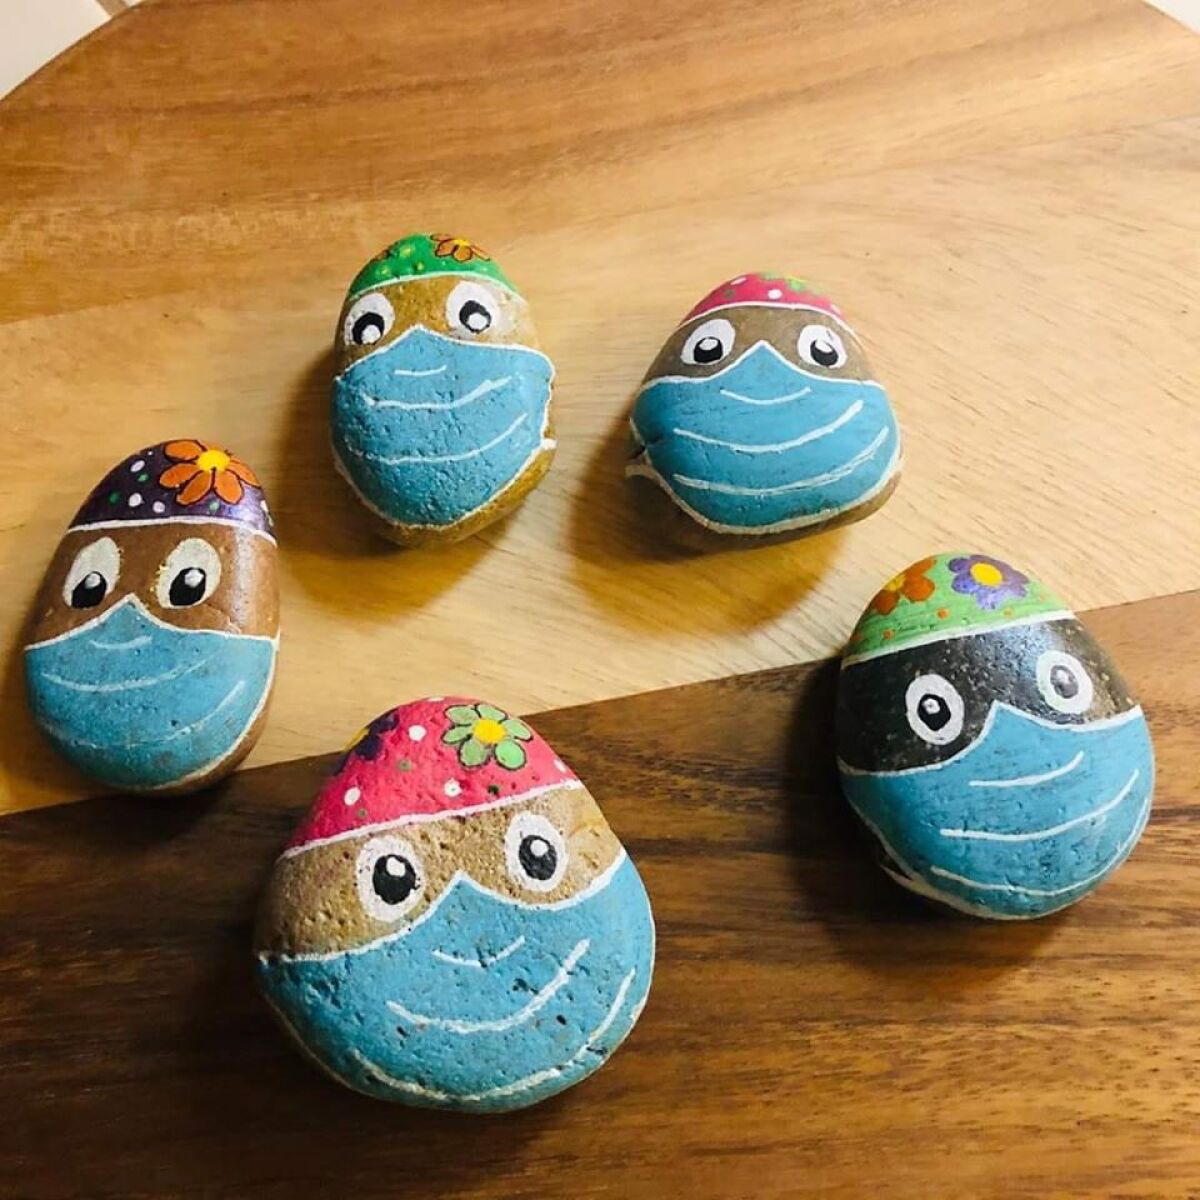 Escondido native Ceci Lusky painted these nurse rocks in honor of her daughter who graduates, virtually, this weekend with her master's degree in nursing from the University of San Diego.